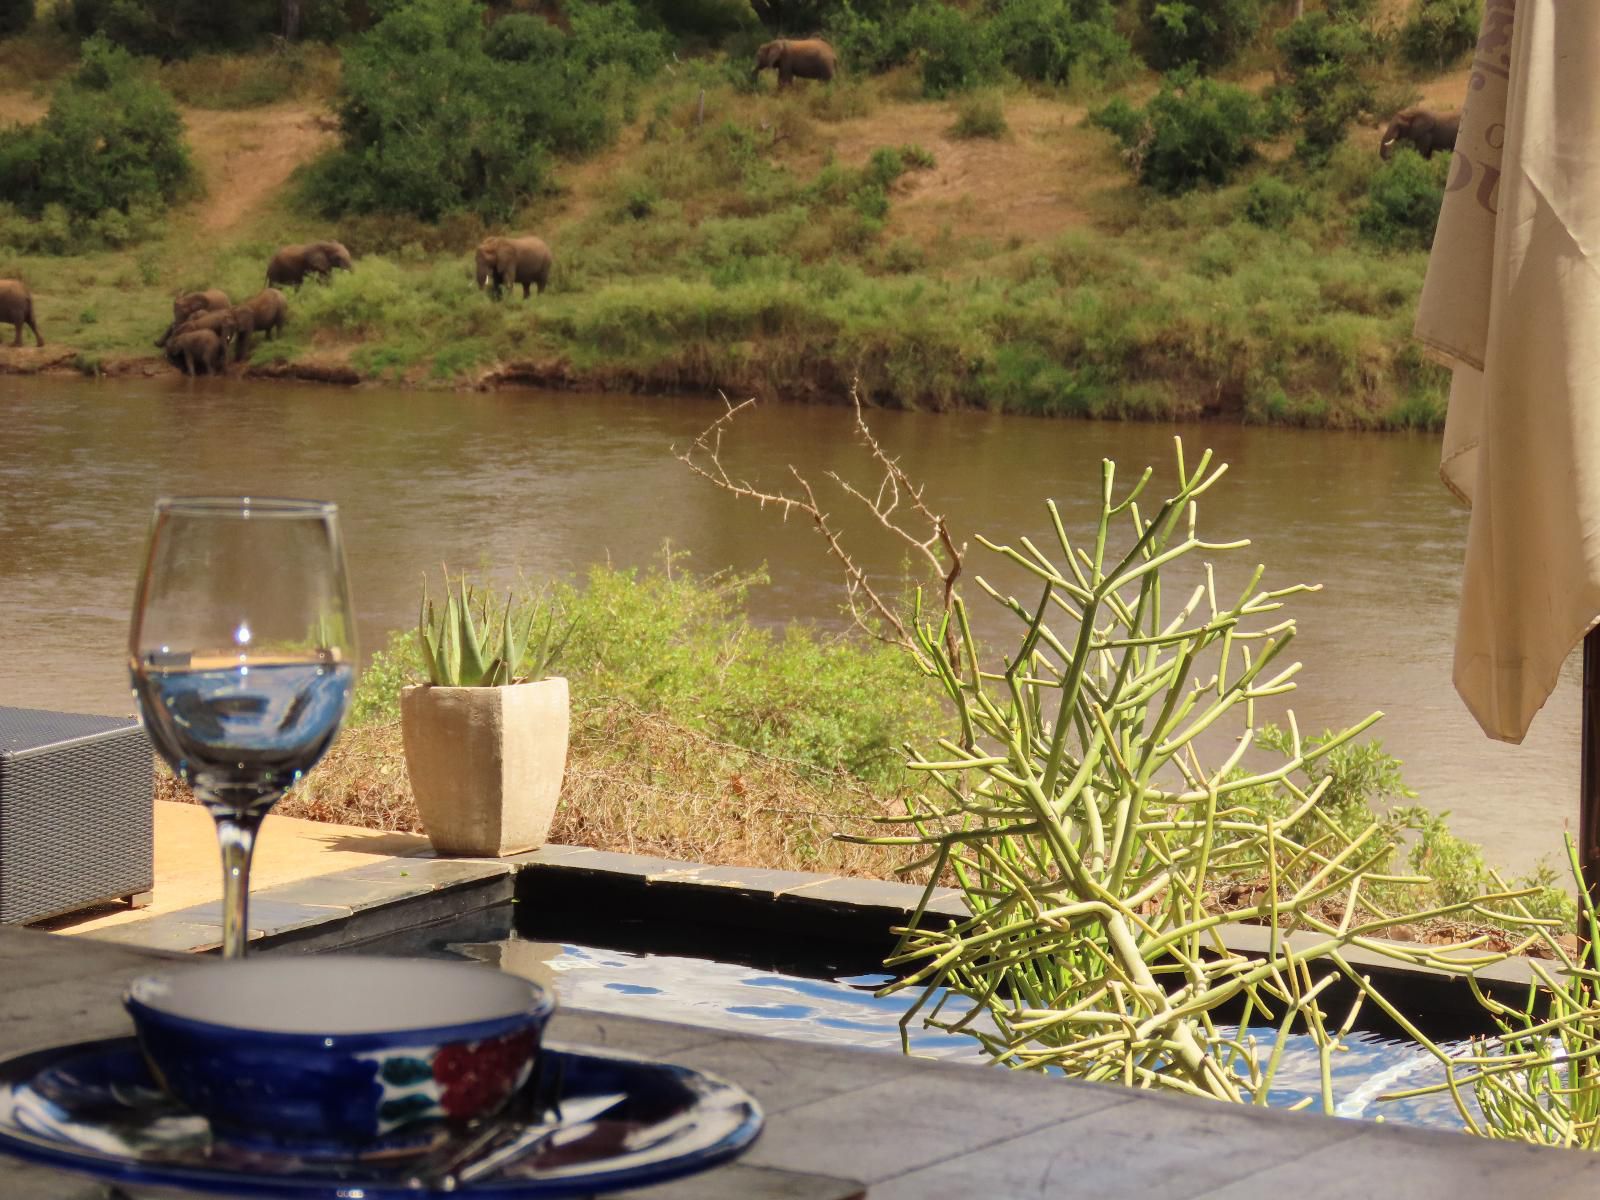 Hennie S Rest Guest House Malelane Mpumalanga South Africa River, Nature, Waters, Food